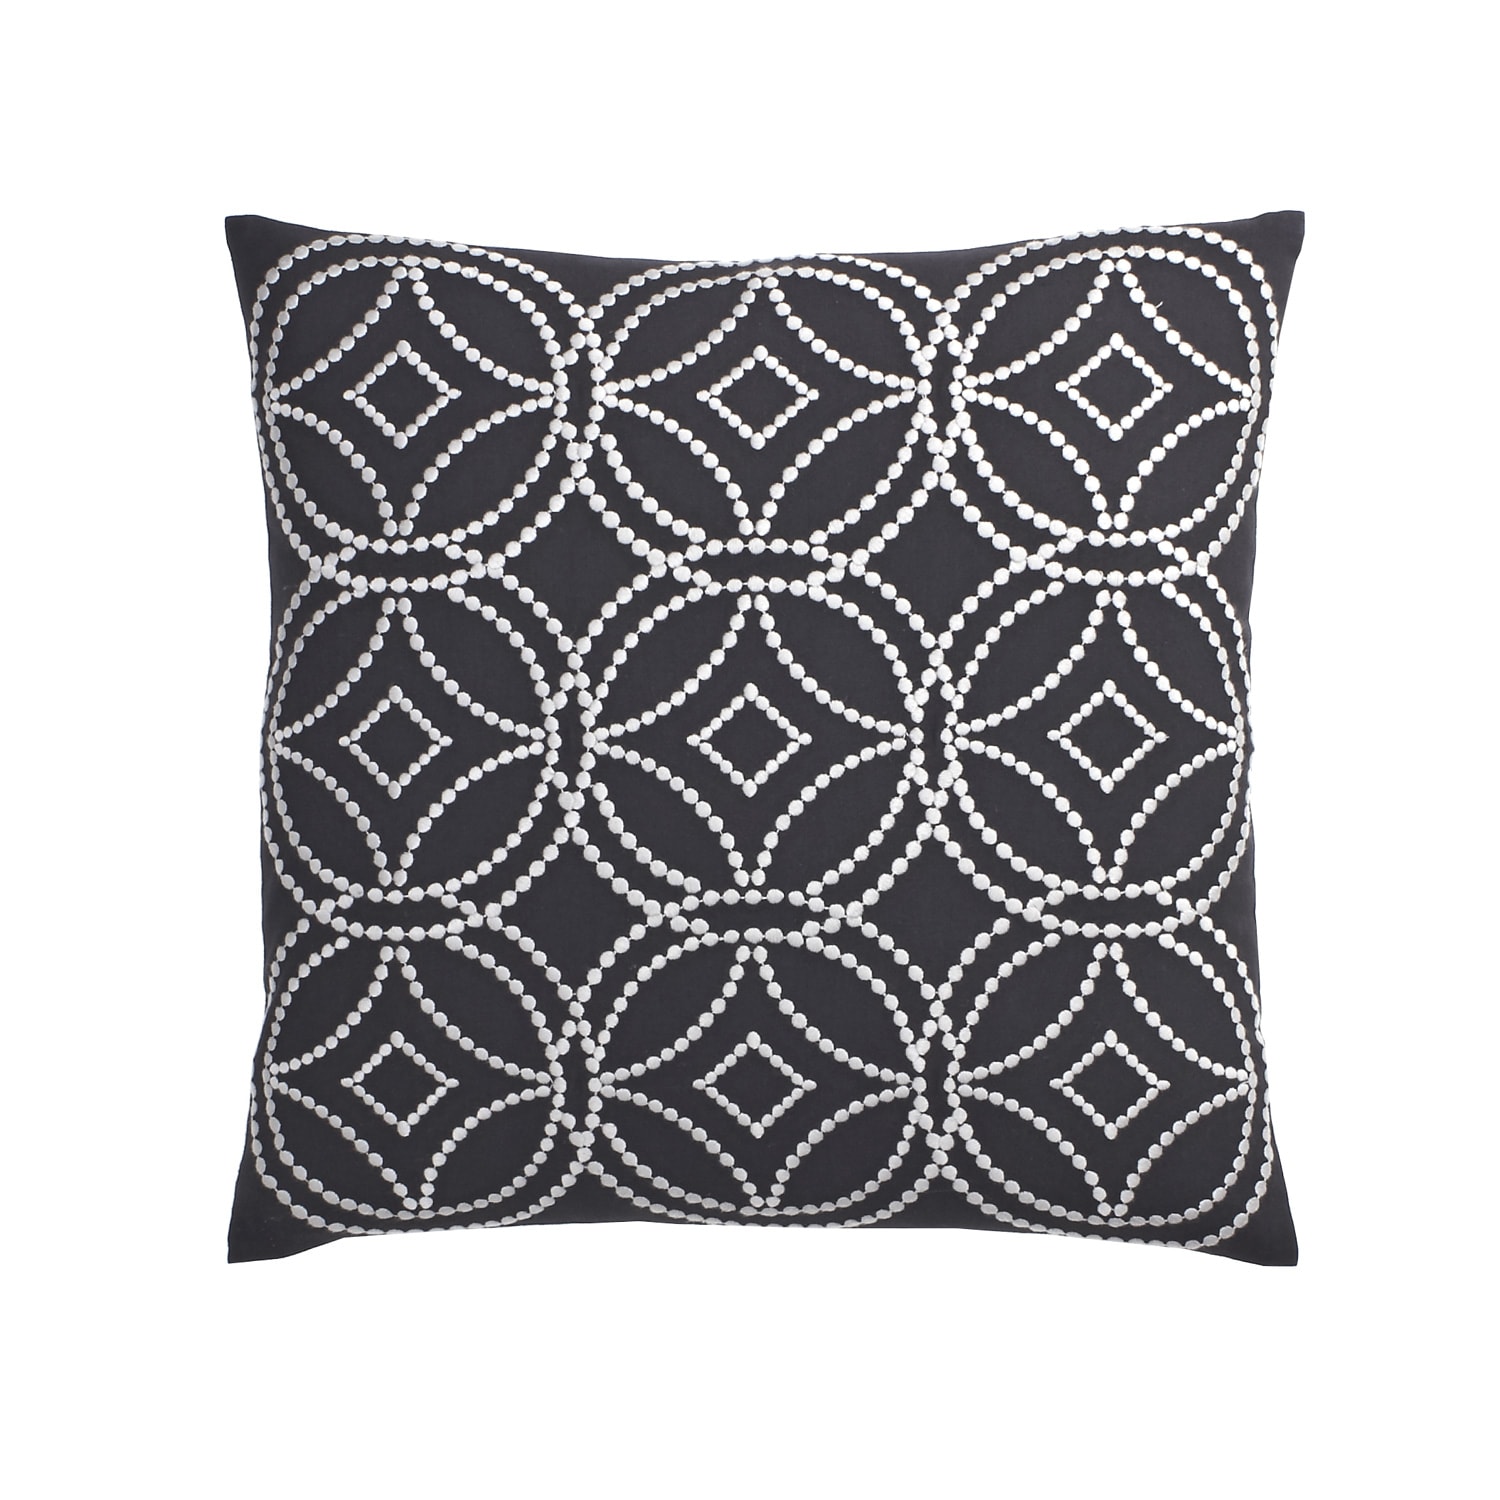 Cstudio Home Geo Embroidered Pillow Covers